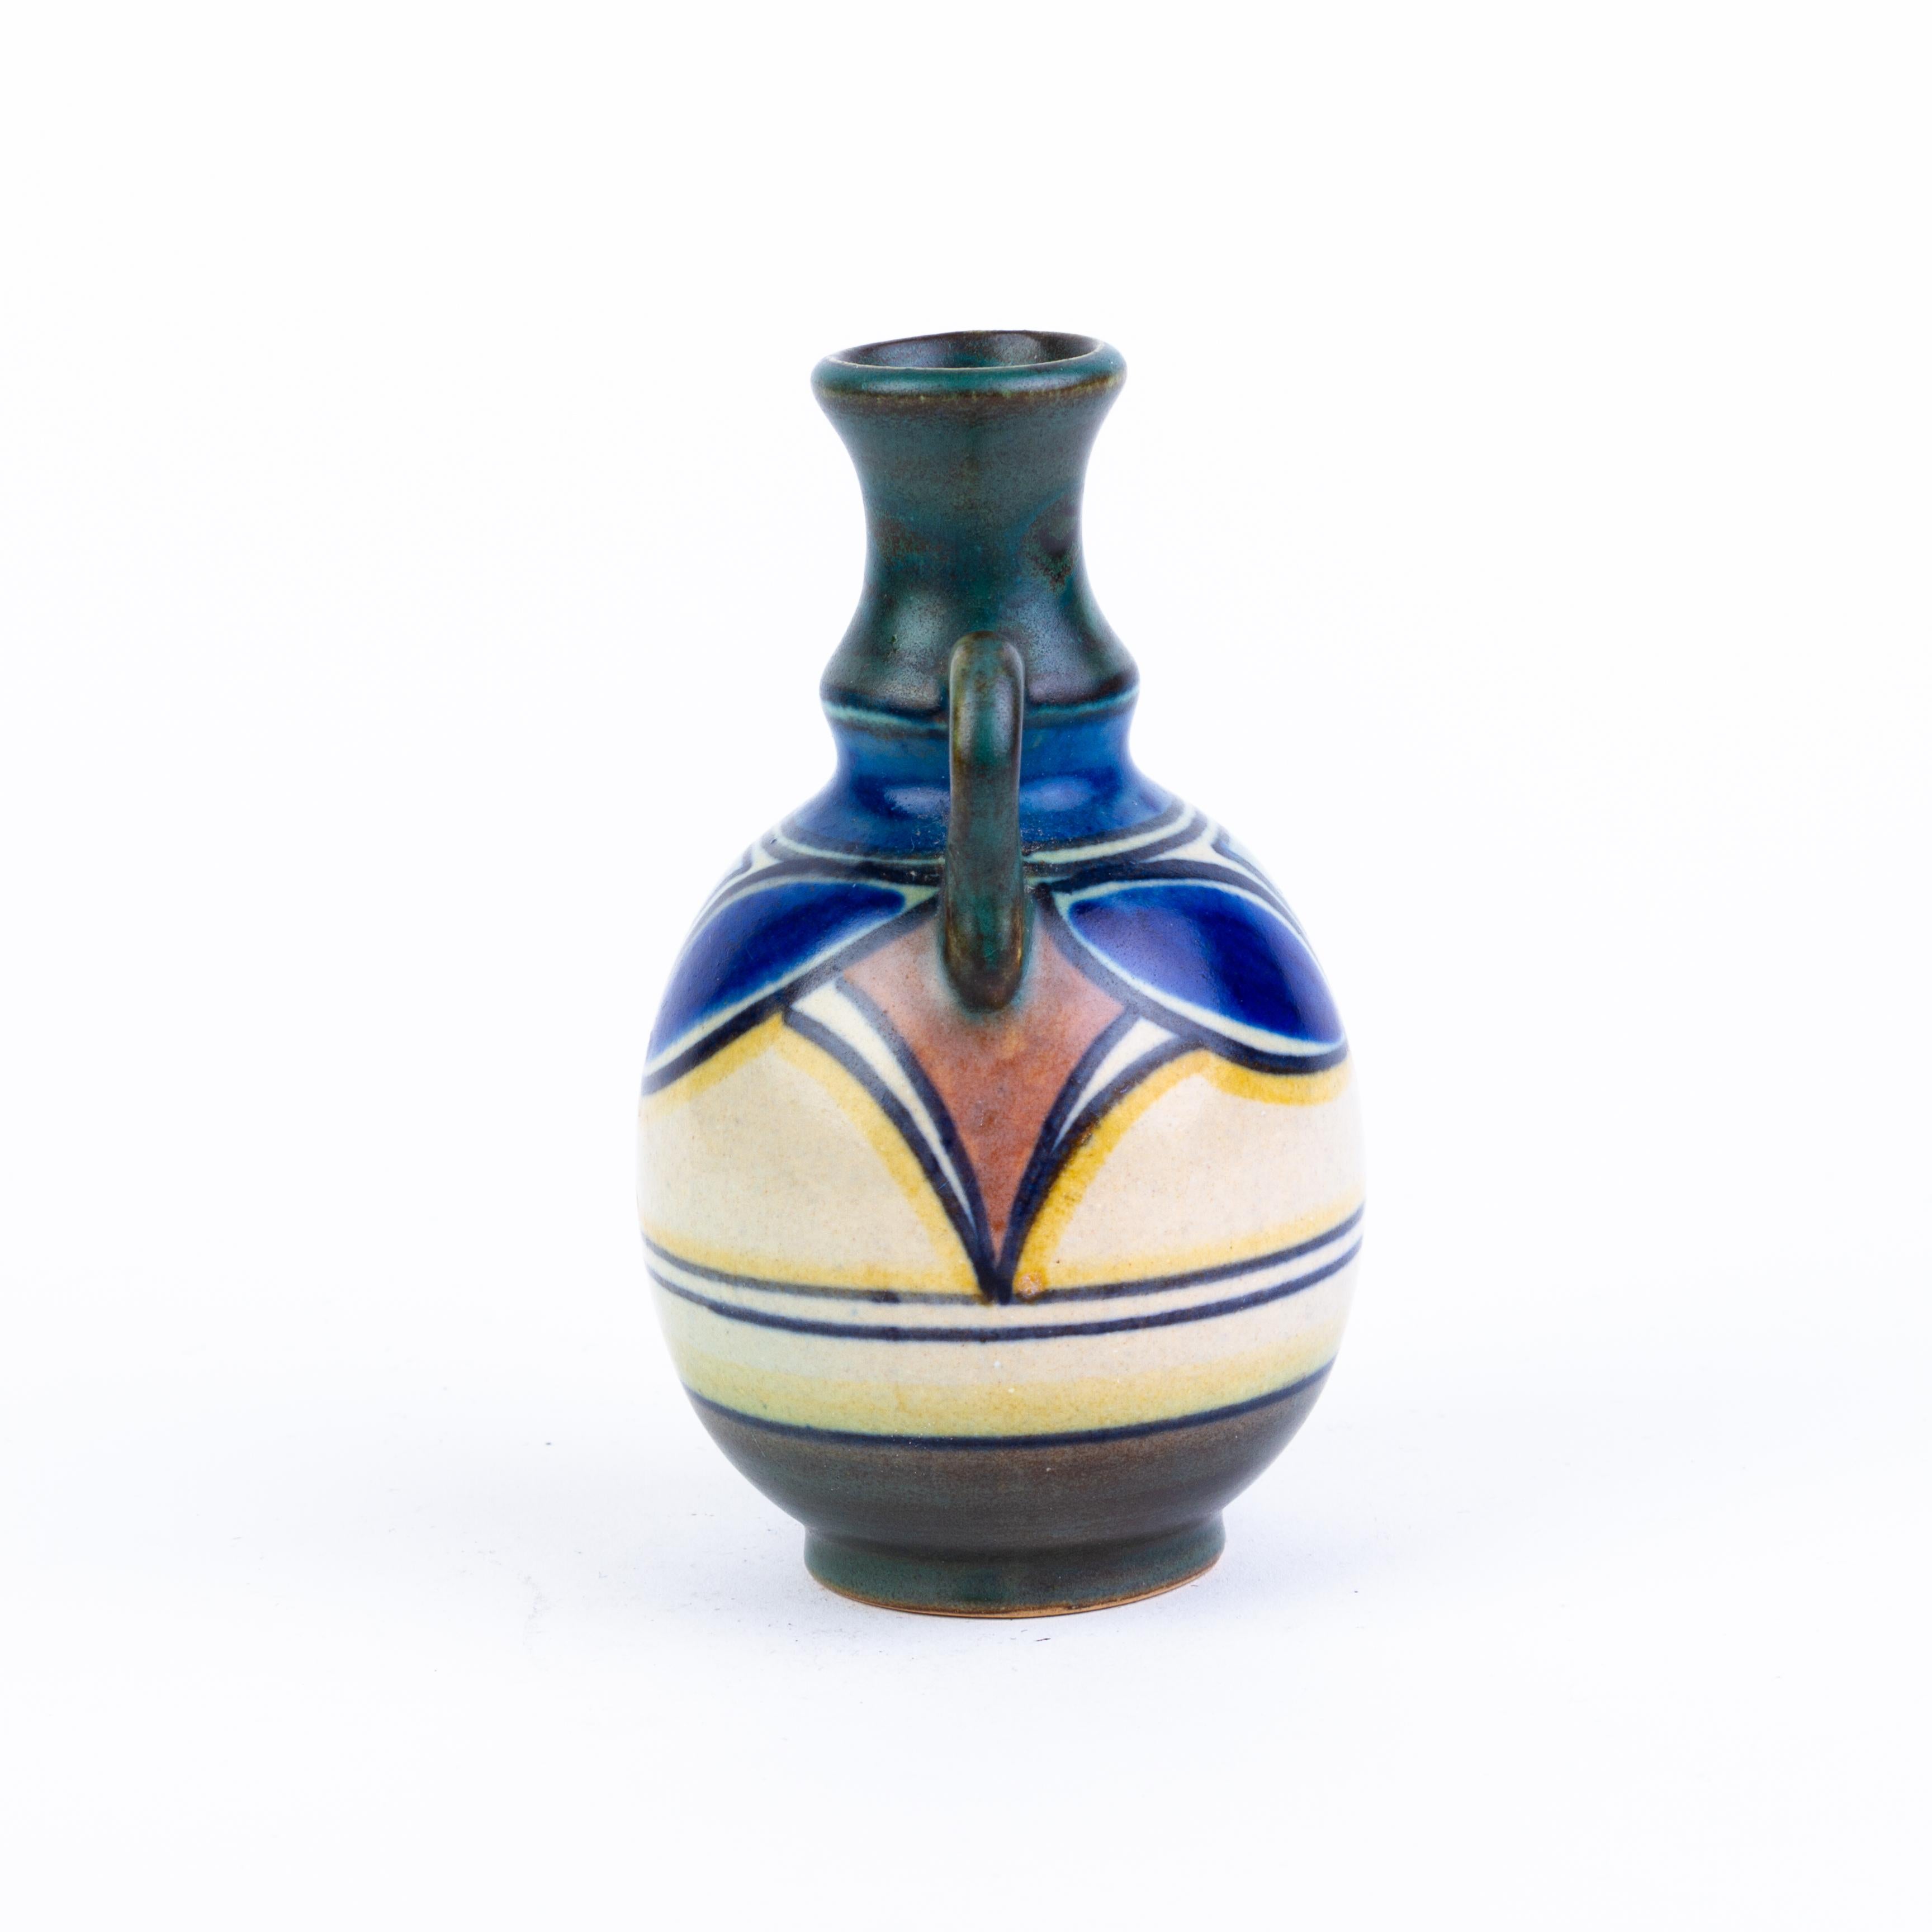 Holland Dutch Art Pottery Earthenware Vase 
Good condition 
From a private collection.
Free international shipping.